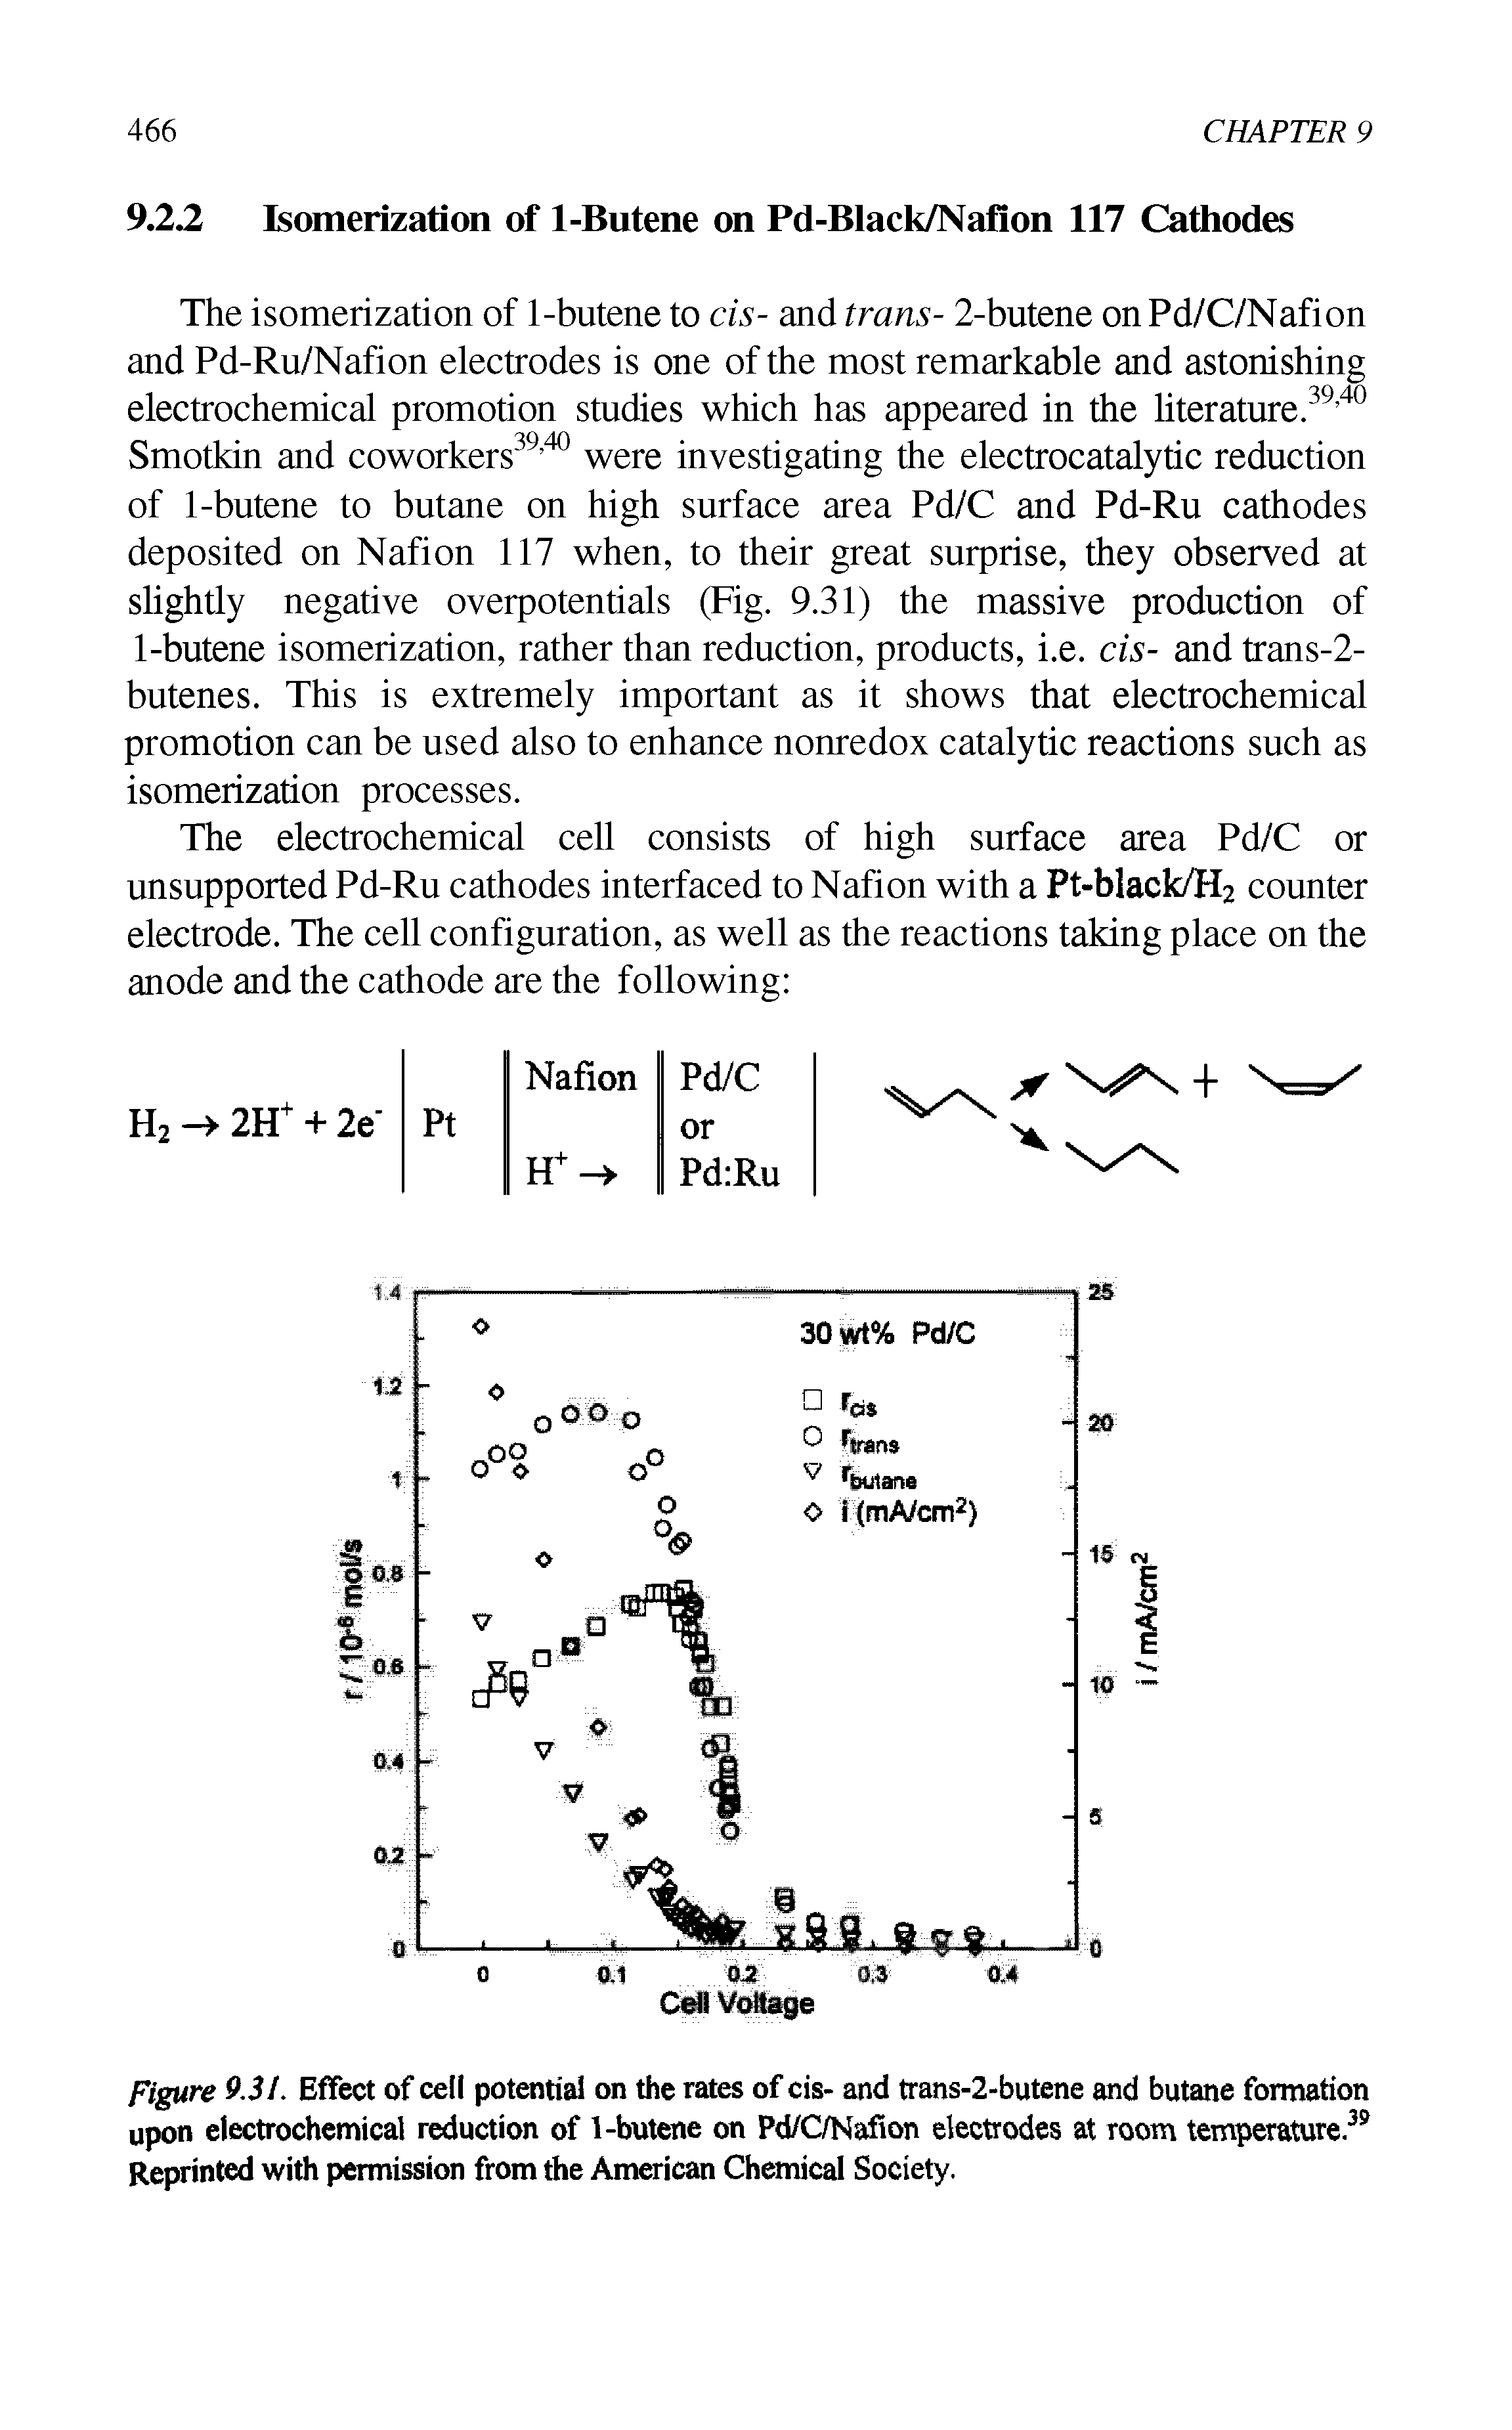 Figure 9.31. Effect of cell potential on the rates of cis- and trans-2-butene and butane formation upon electrochemical reduction of 1-butene on Pd/C/Nafion electrodes at room temperature.35 Reprinted with permission from the American Chemical Society.